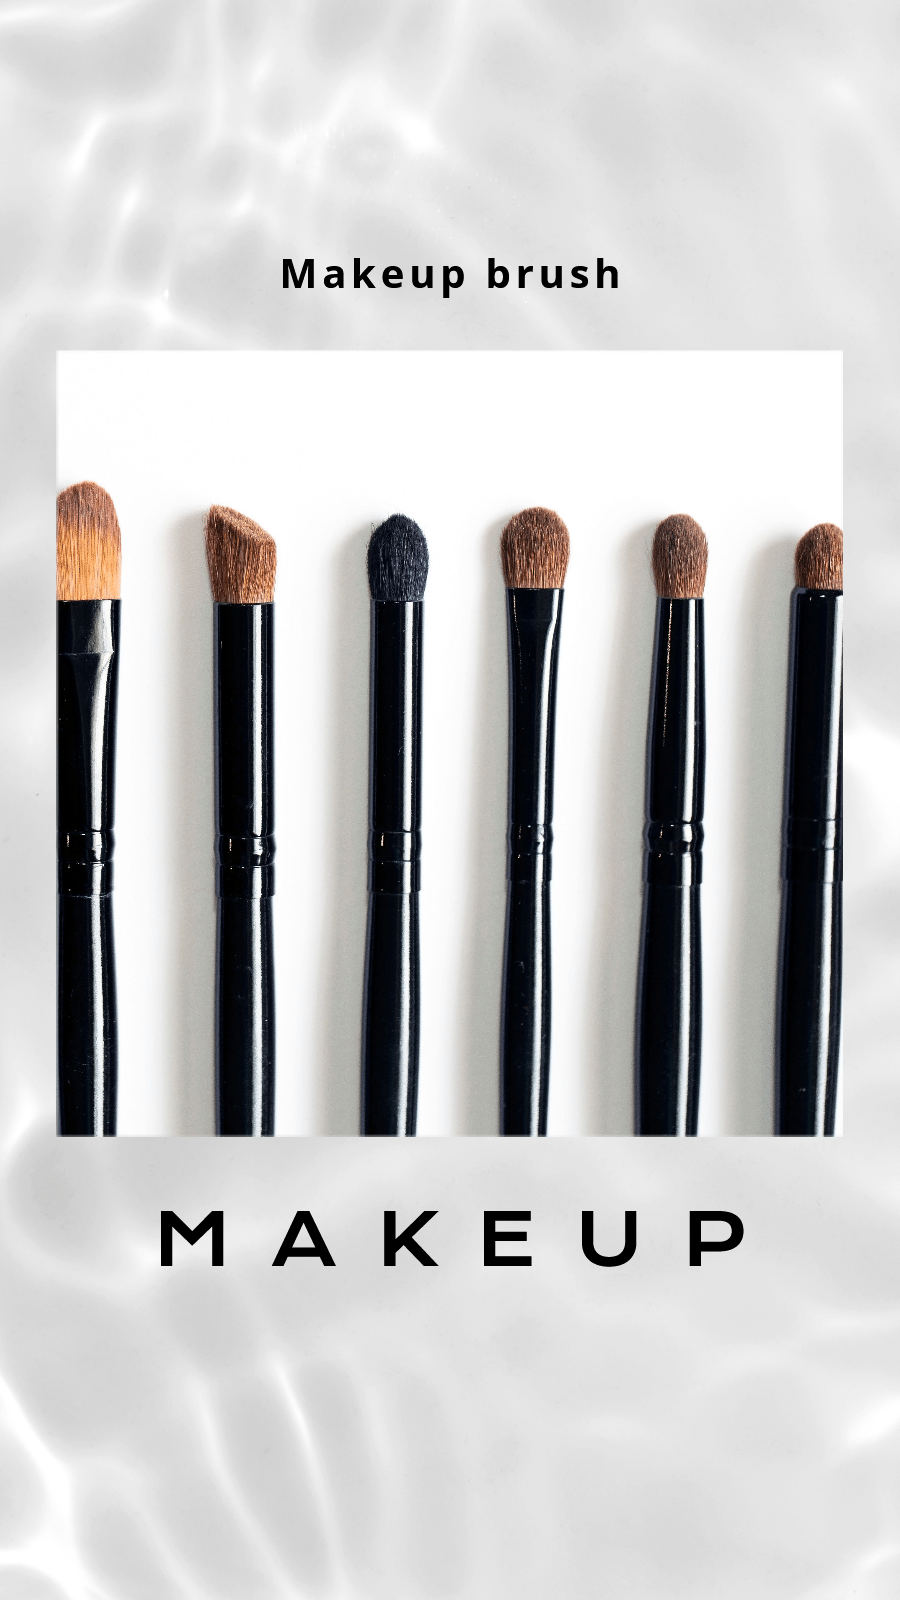 Simple Fashion Makeup Brush Display Introduction Instagram Story预览效果